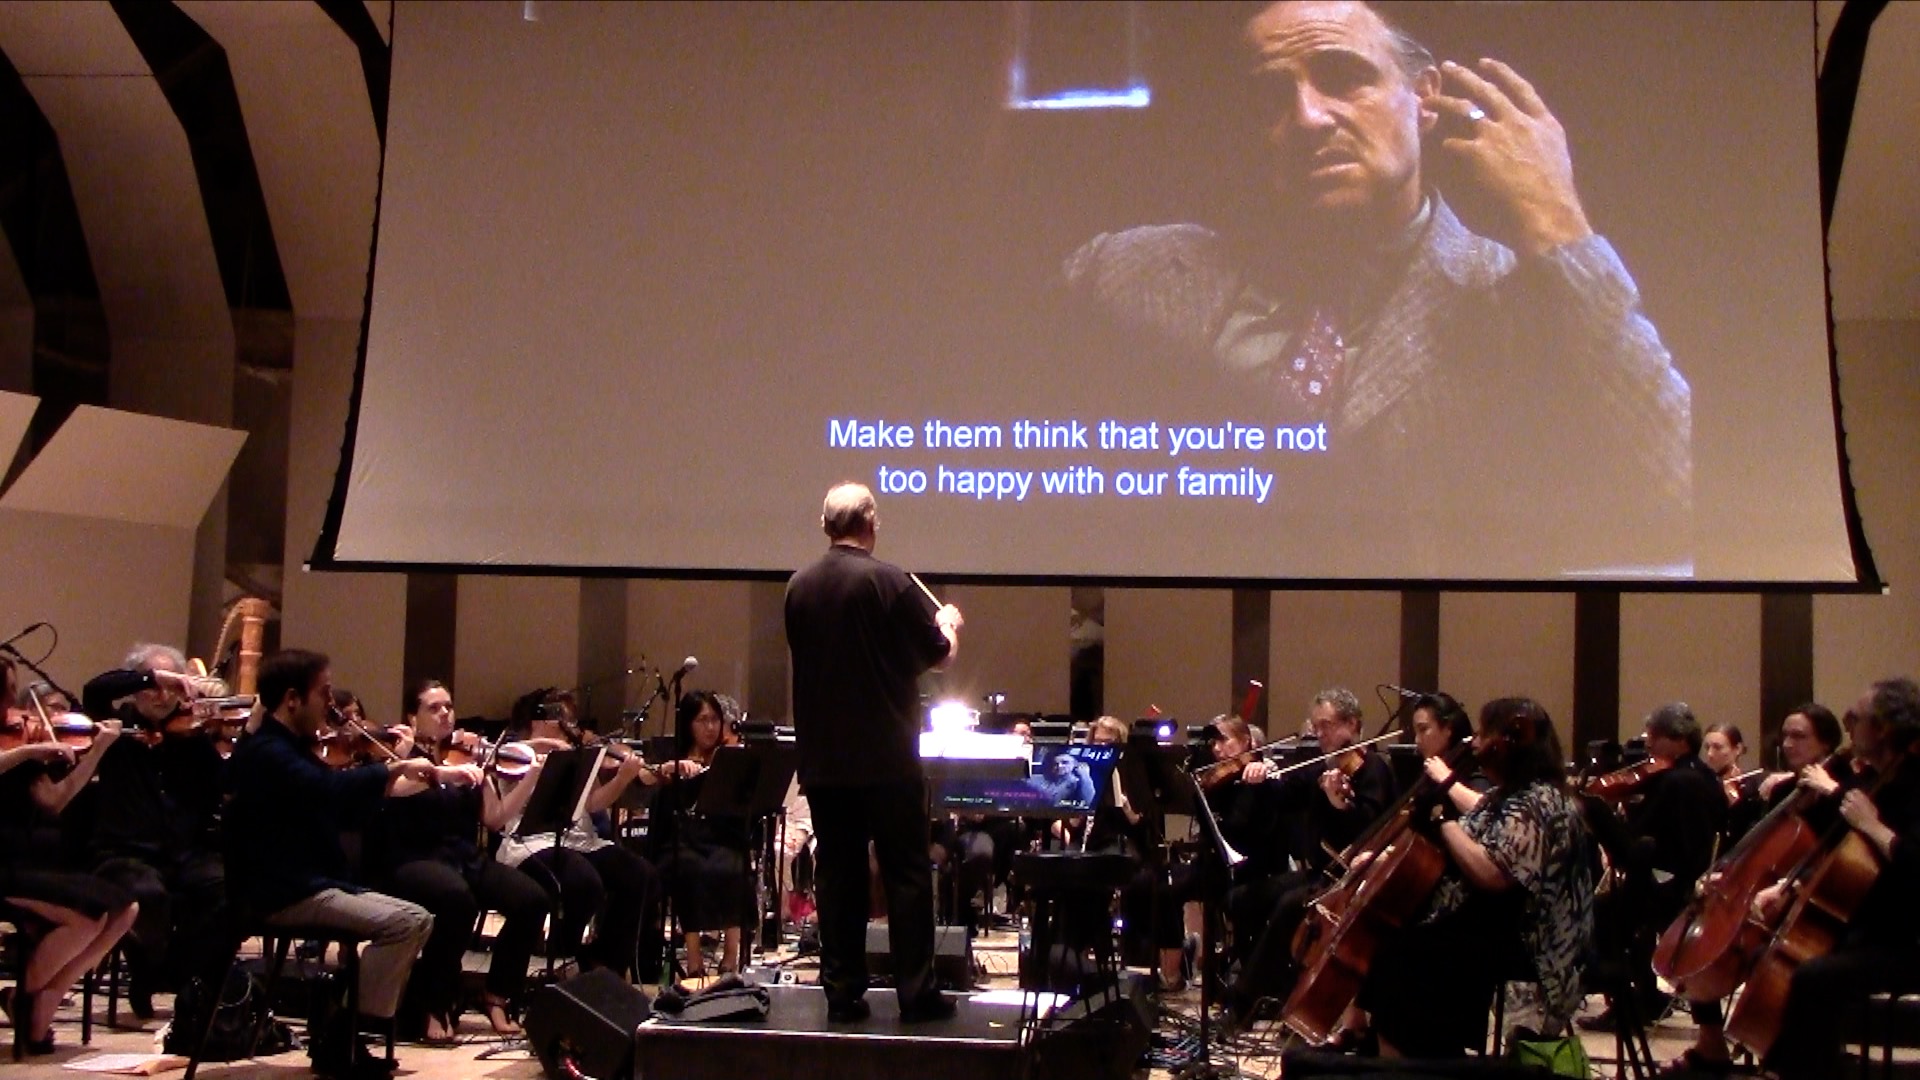 The Godfather Movie with Live Orchestra at the Tilles Center at LIU Post